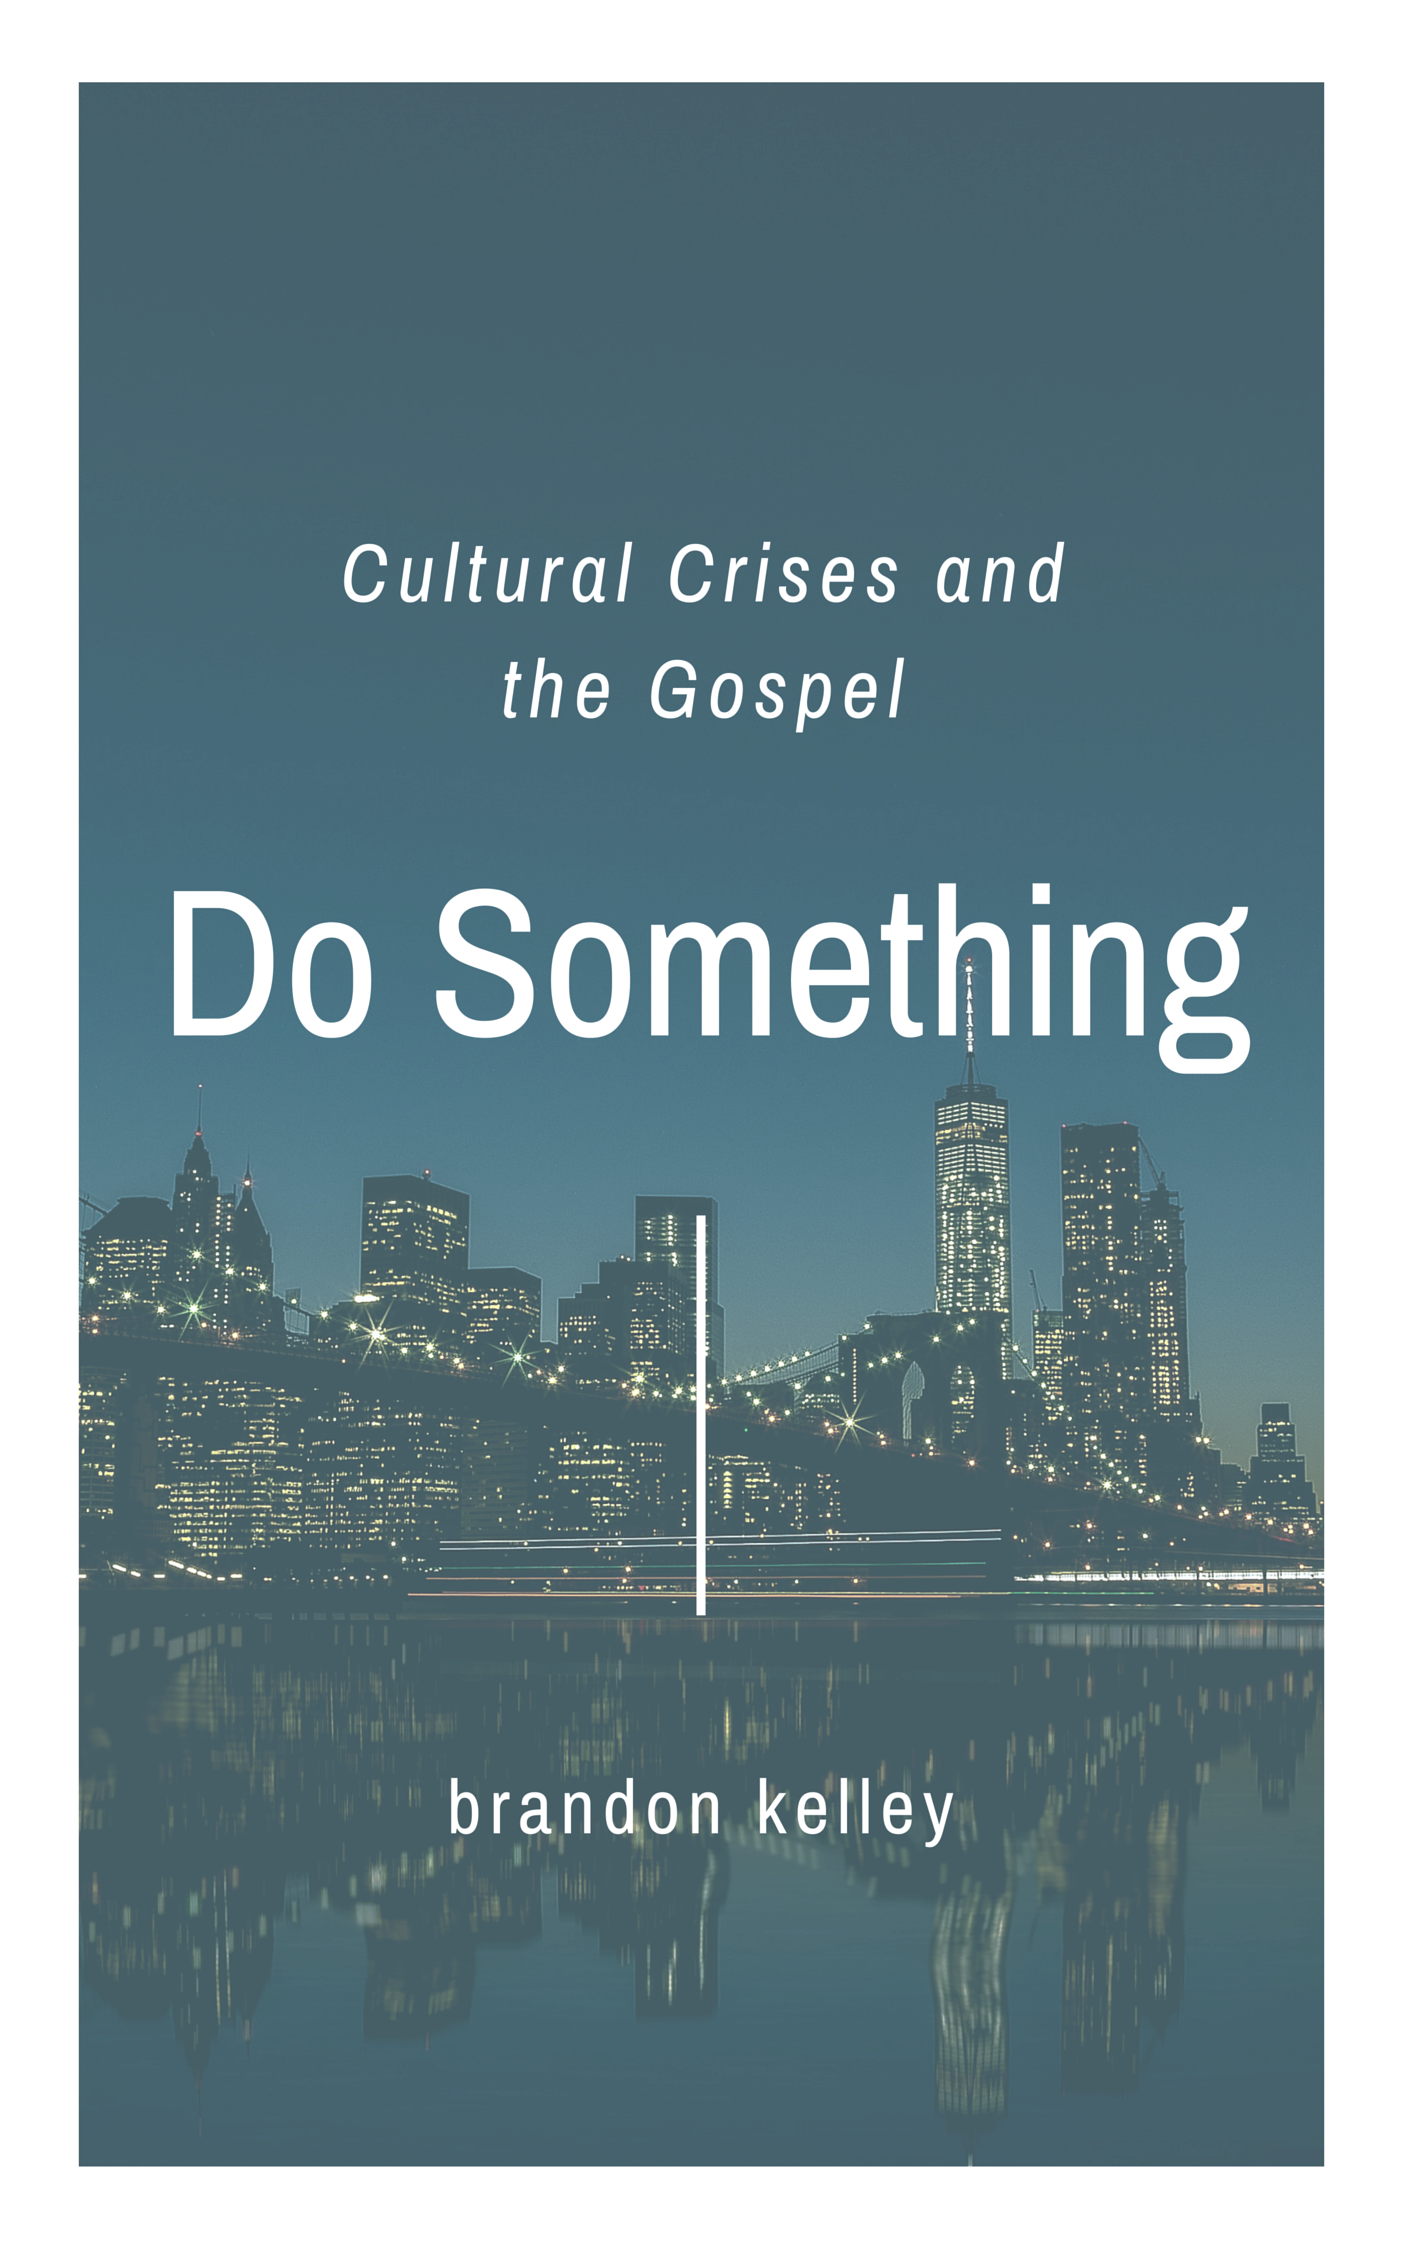 Do Something: Cultural Crises and the Gospel